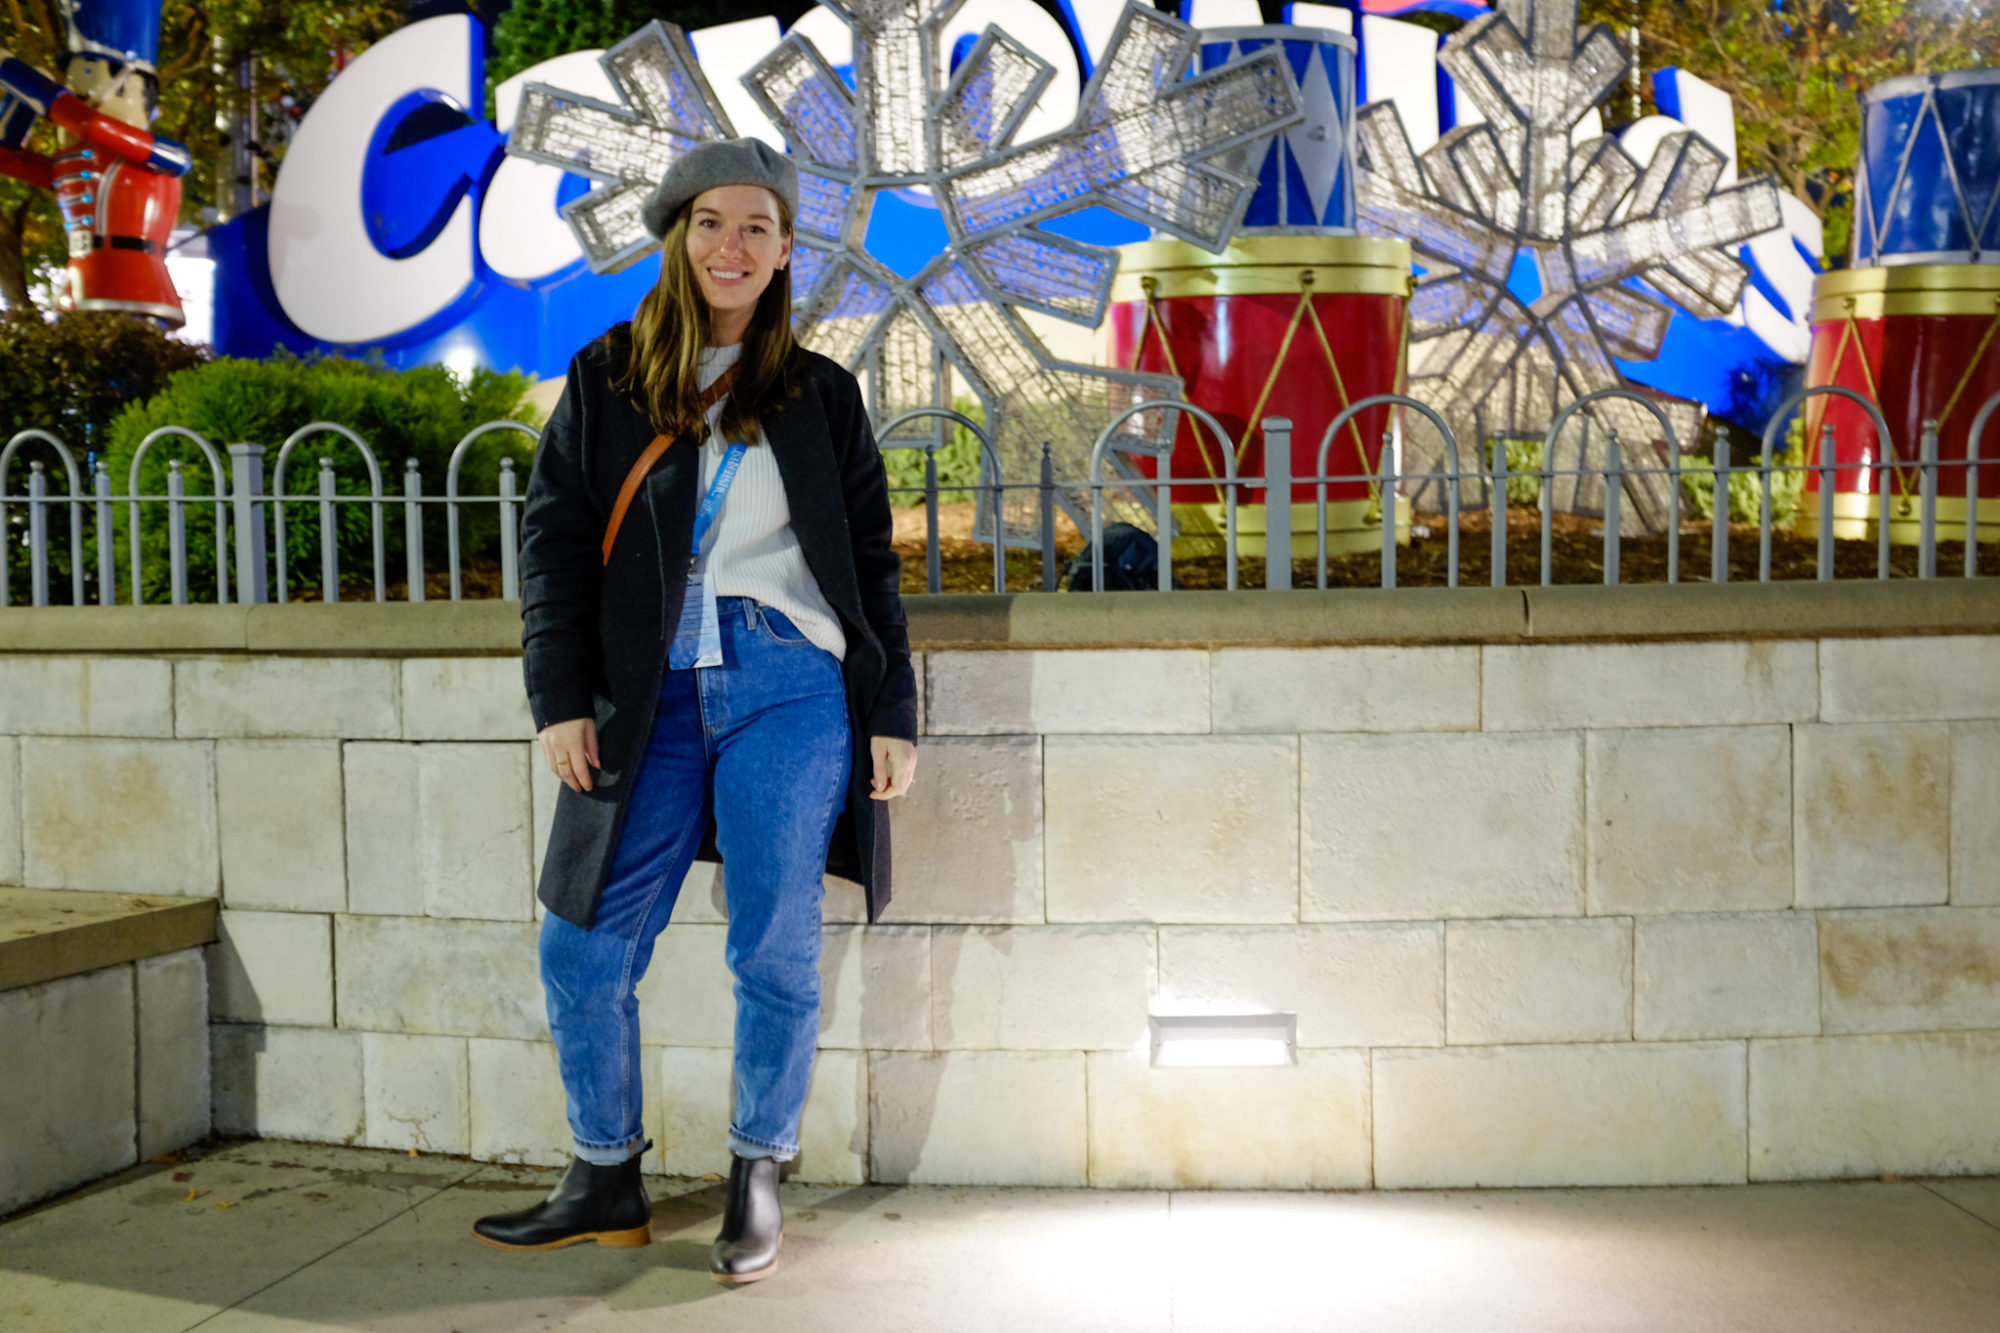 Alyssa wears a sweater, jeans, boots, and beret in front of the Carowinds sign